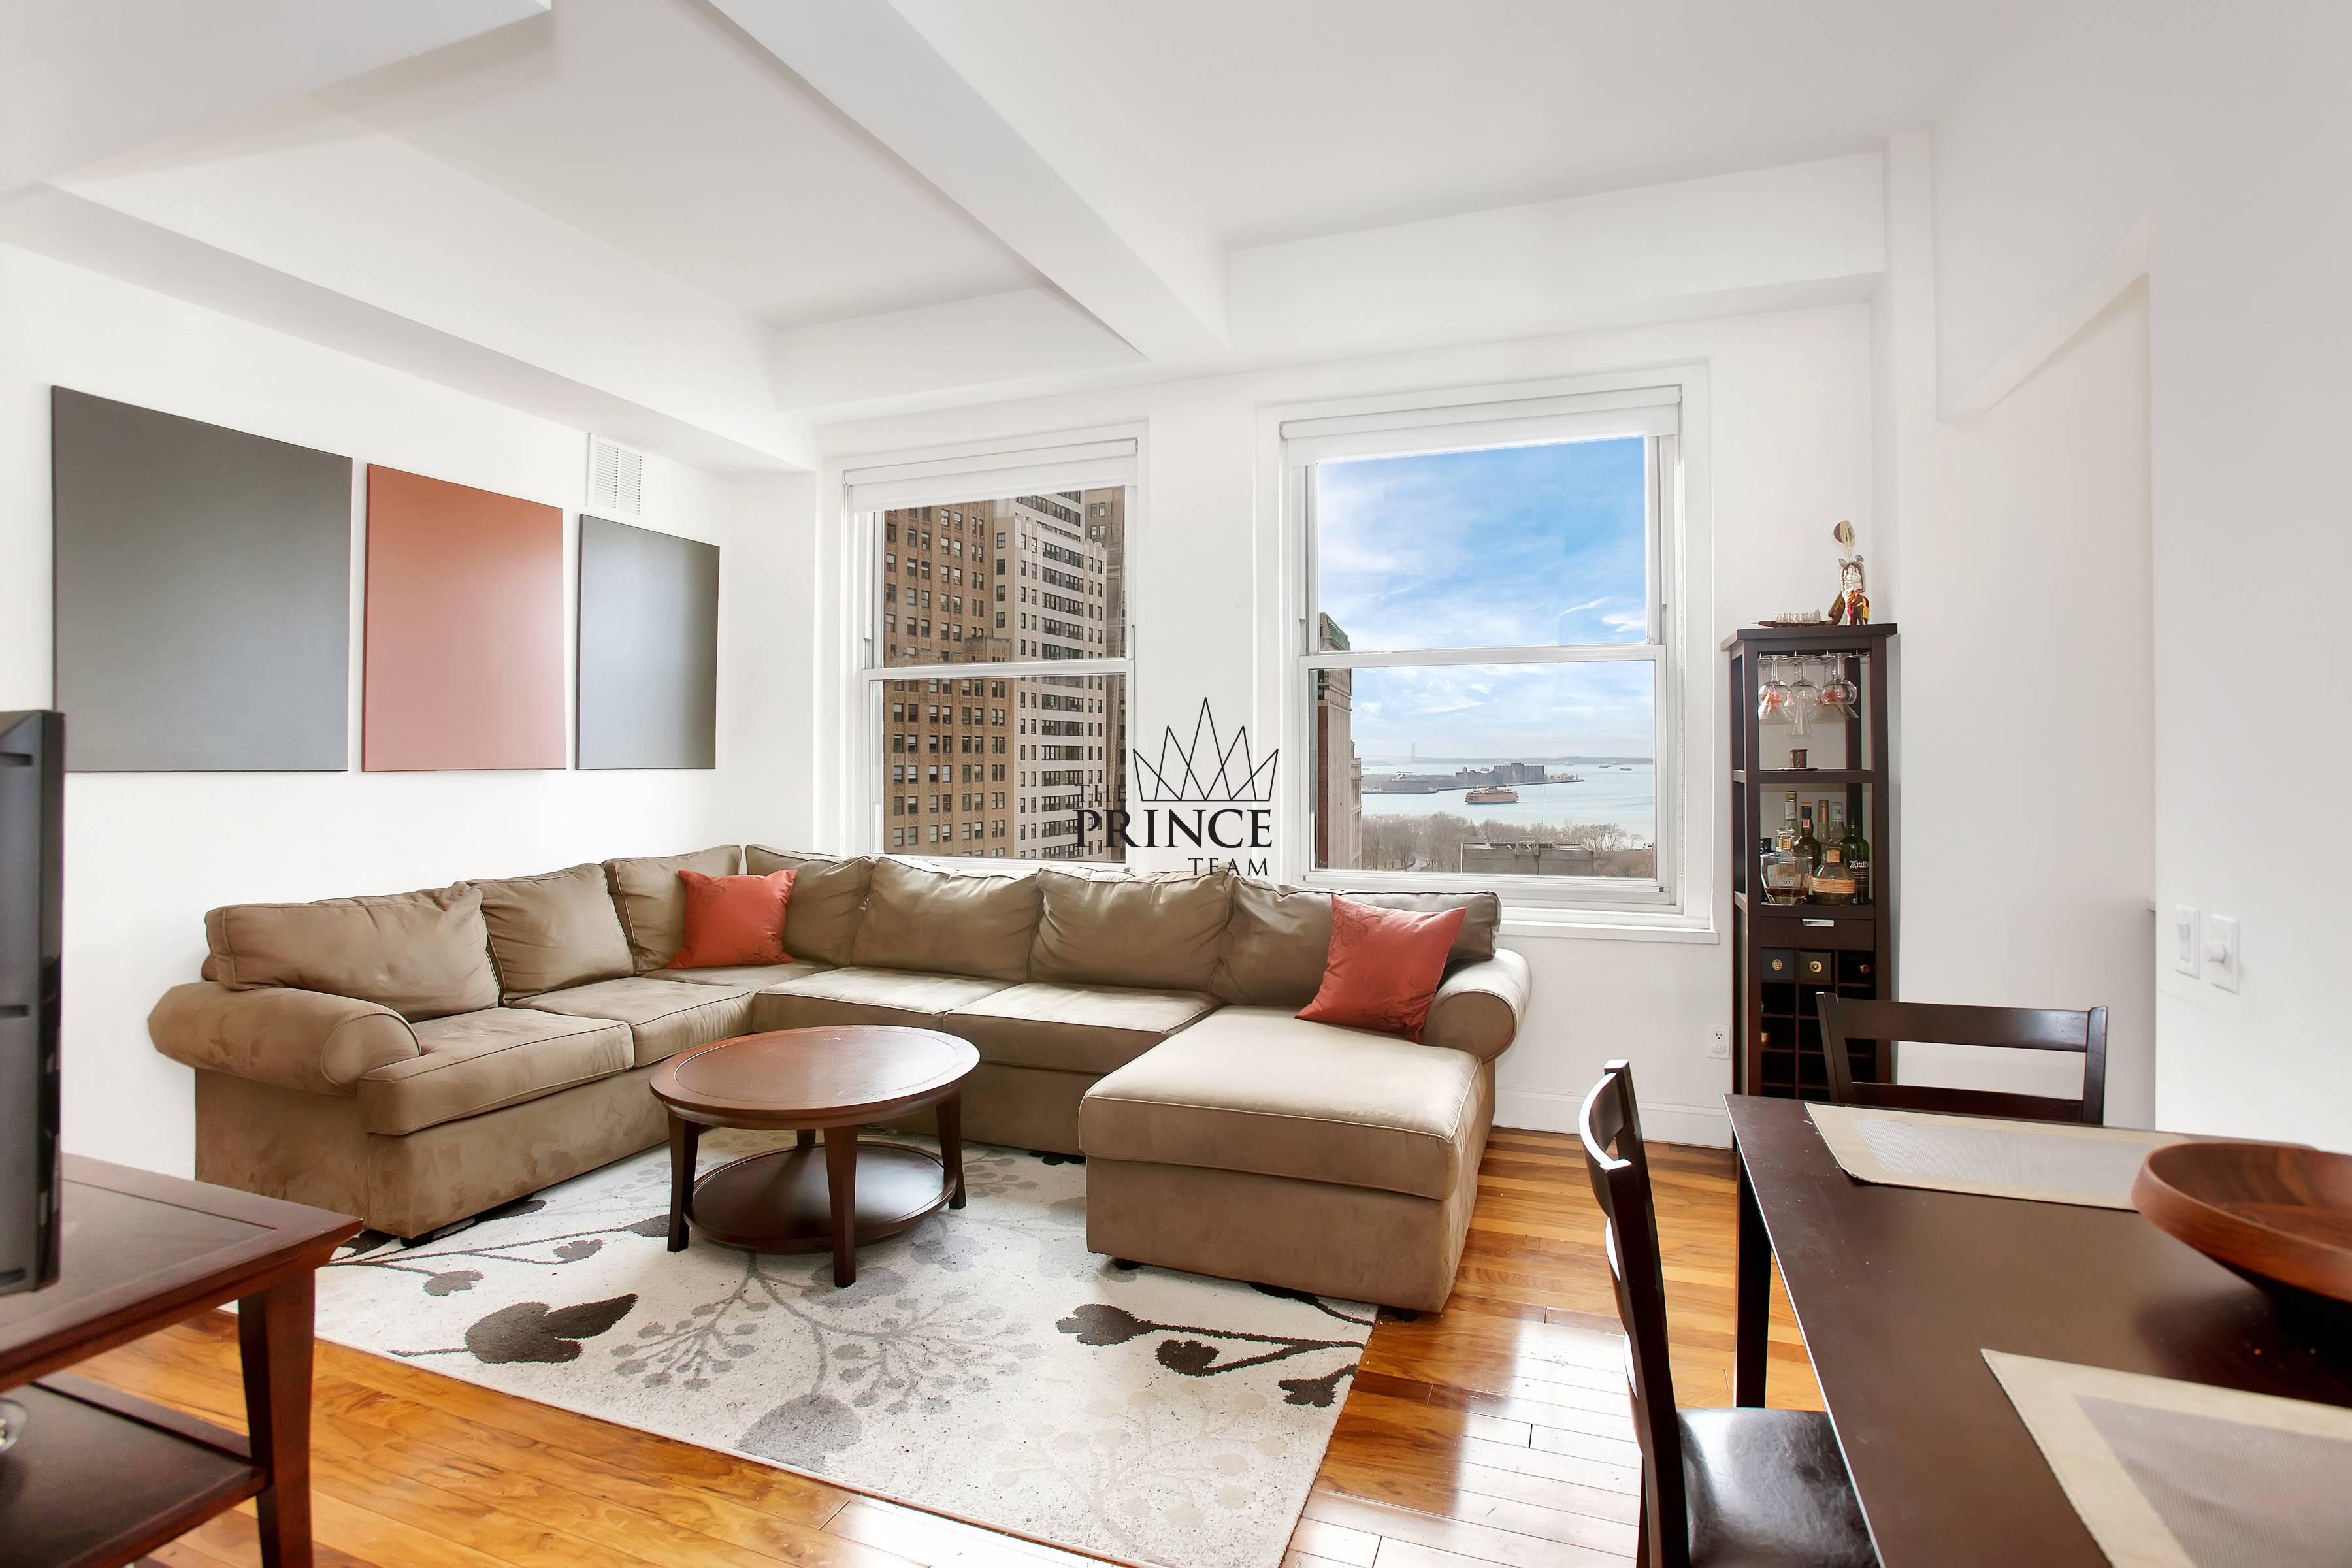 This 3 bedroom, 2 bathroom apartment is located in one of the Financial District's most coveted buildings, 88 Greenwich Street.